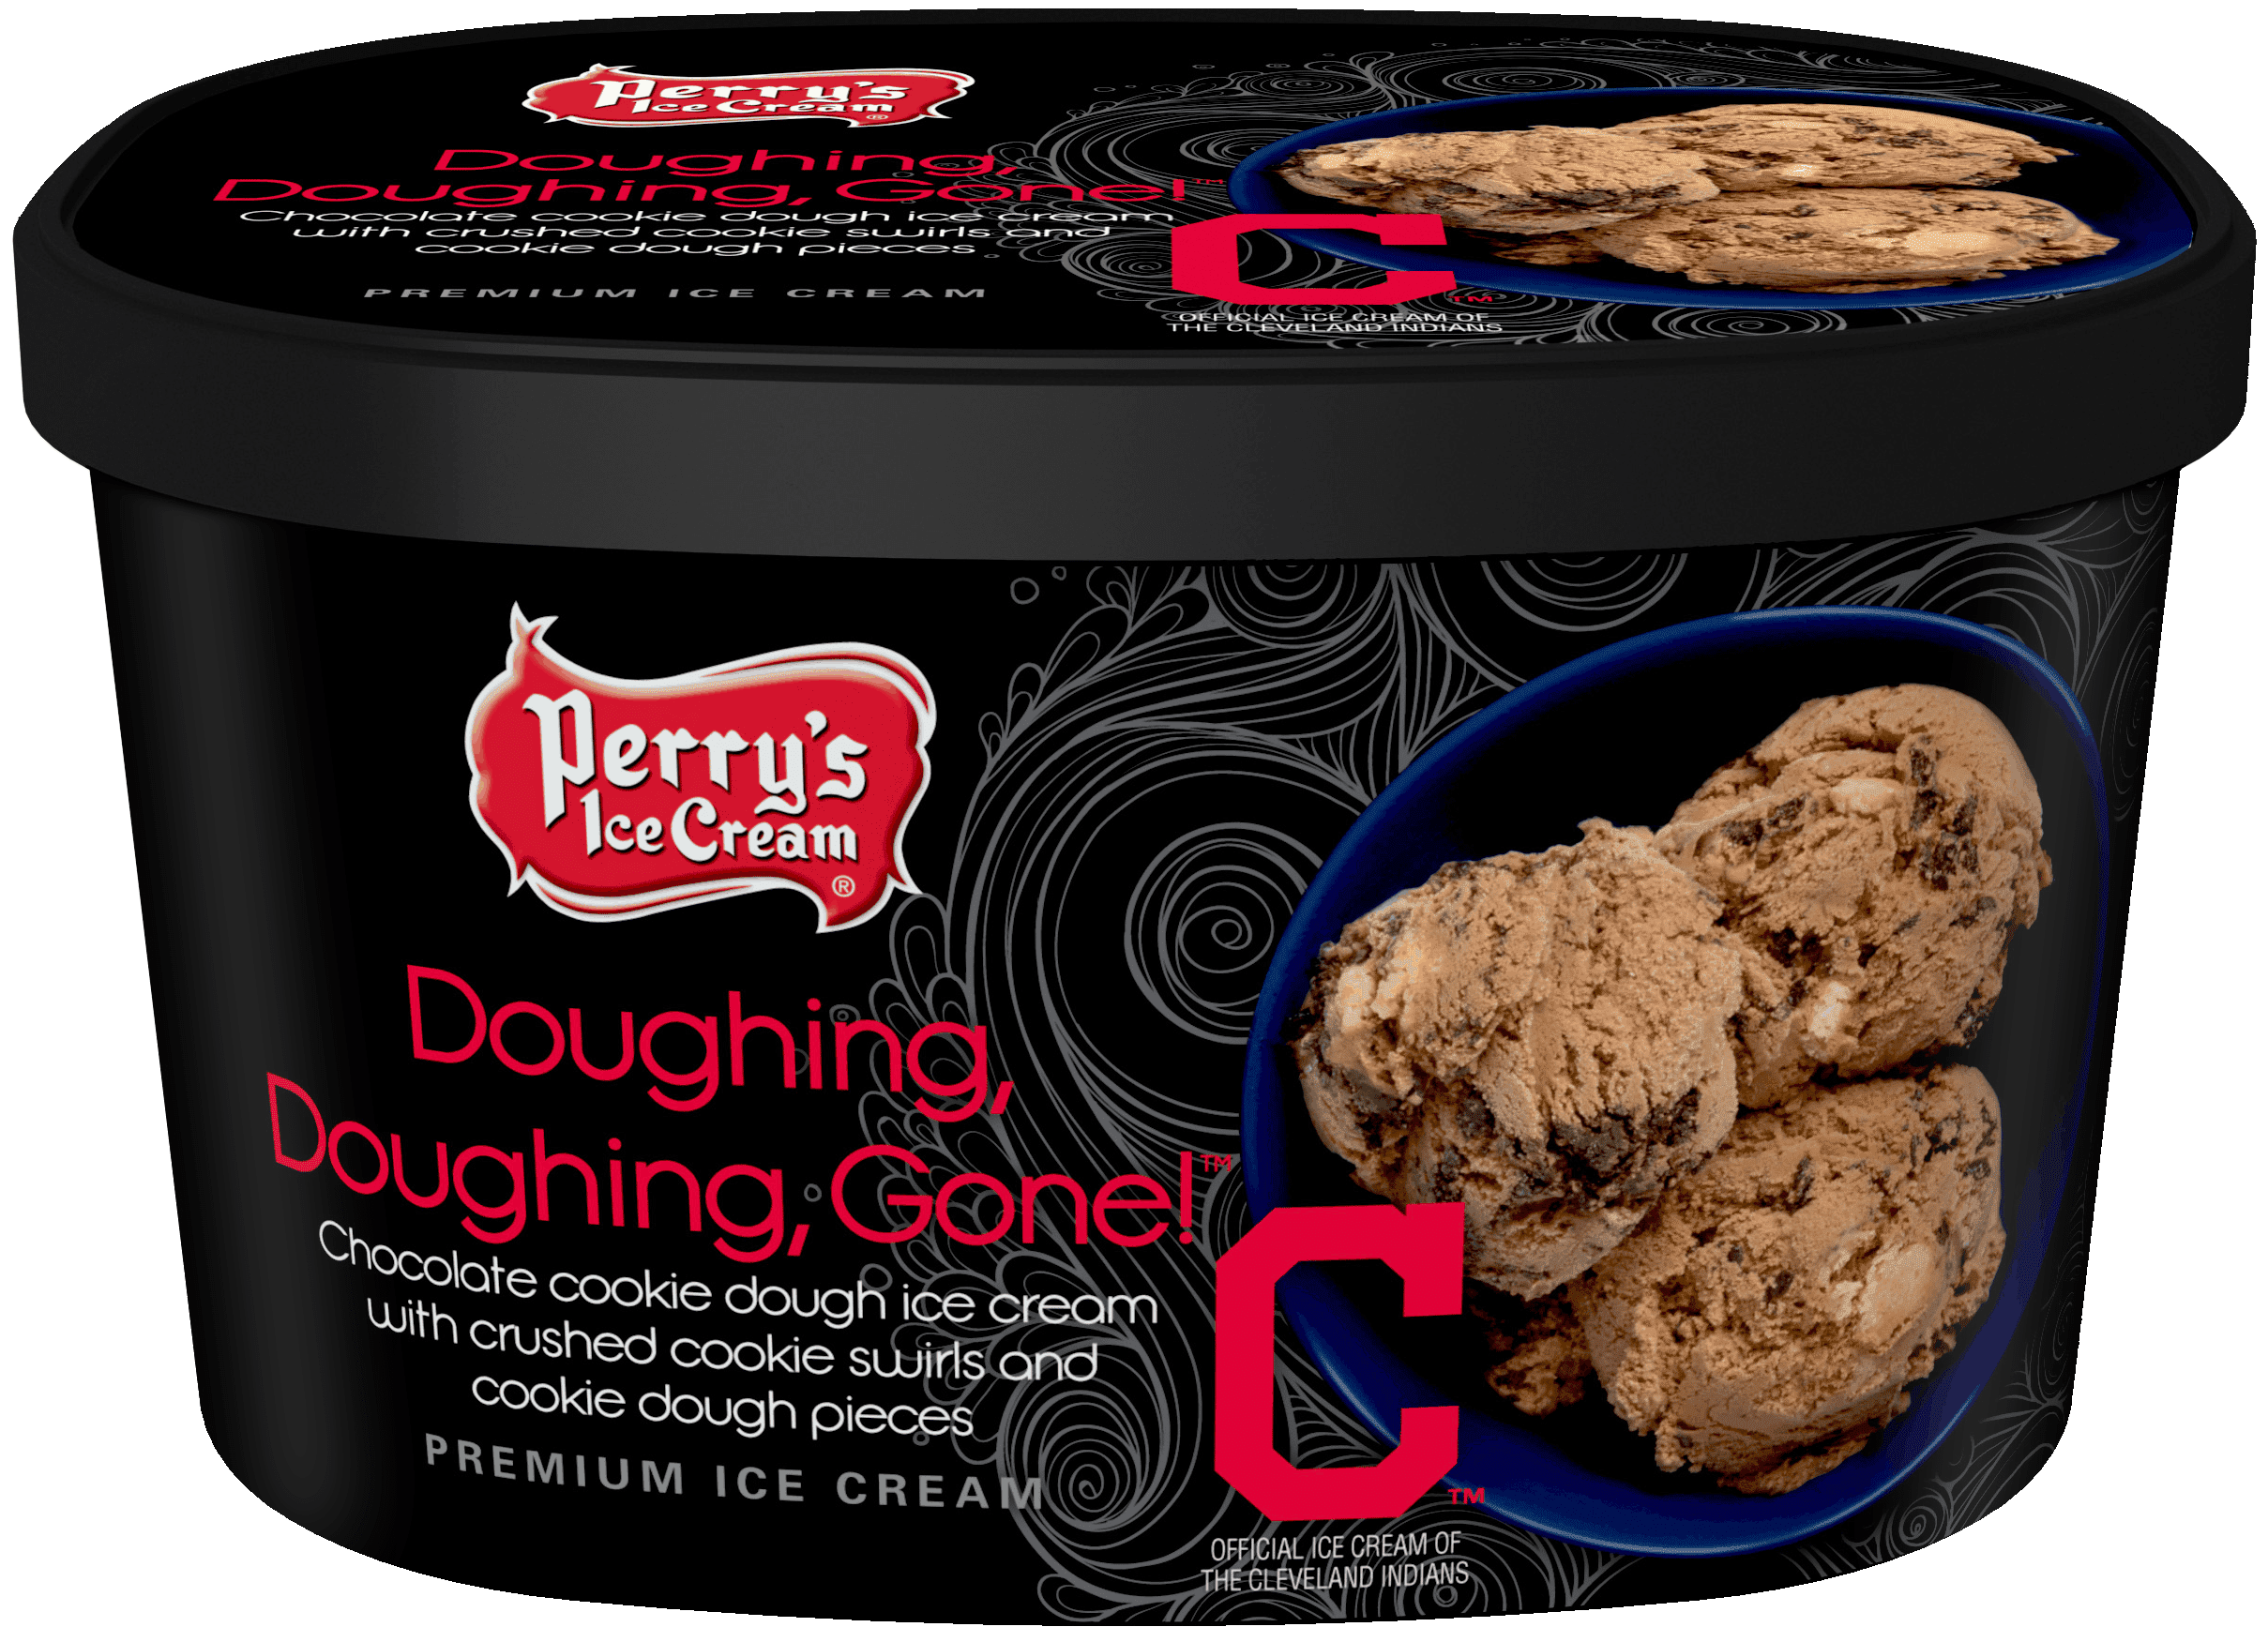 Doughing, Doughing, Gone!™ Perrys Ice Cream Packaging